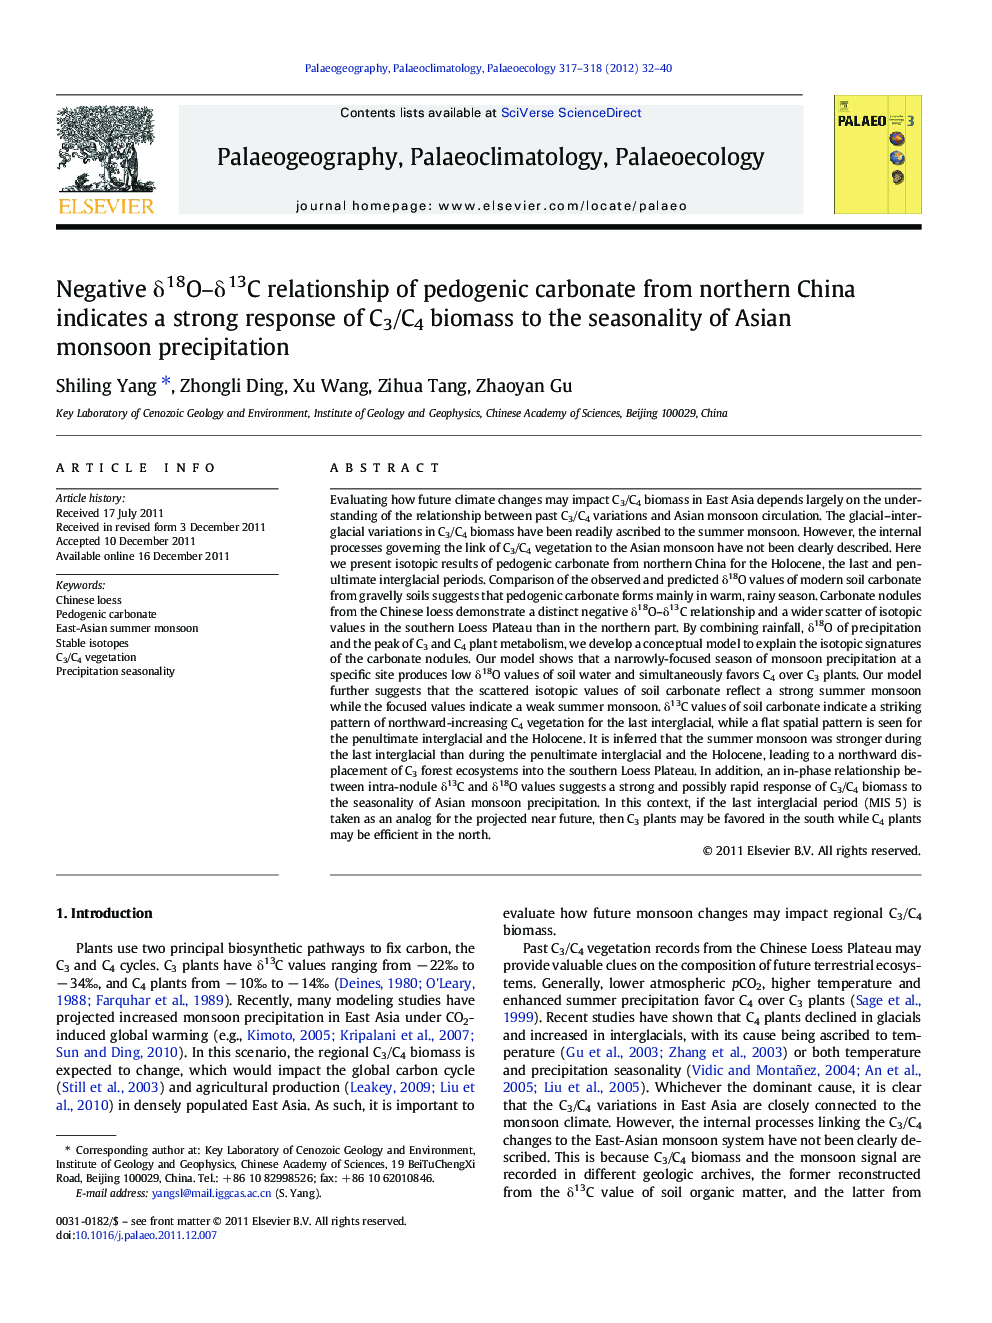 Negative Î´18O-Î´13C relationship of pedogenic carbonate from northern China indicates a strong response of C3/C4 biomass to the seasonality of Asian monsoon precipitation